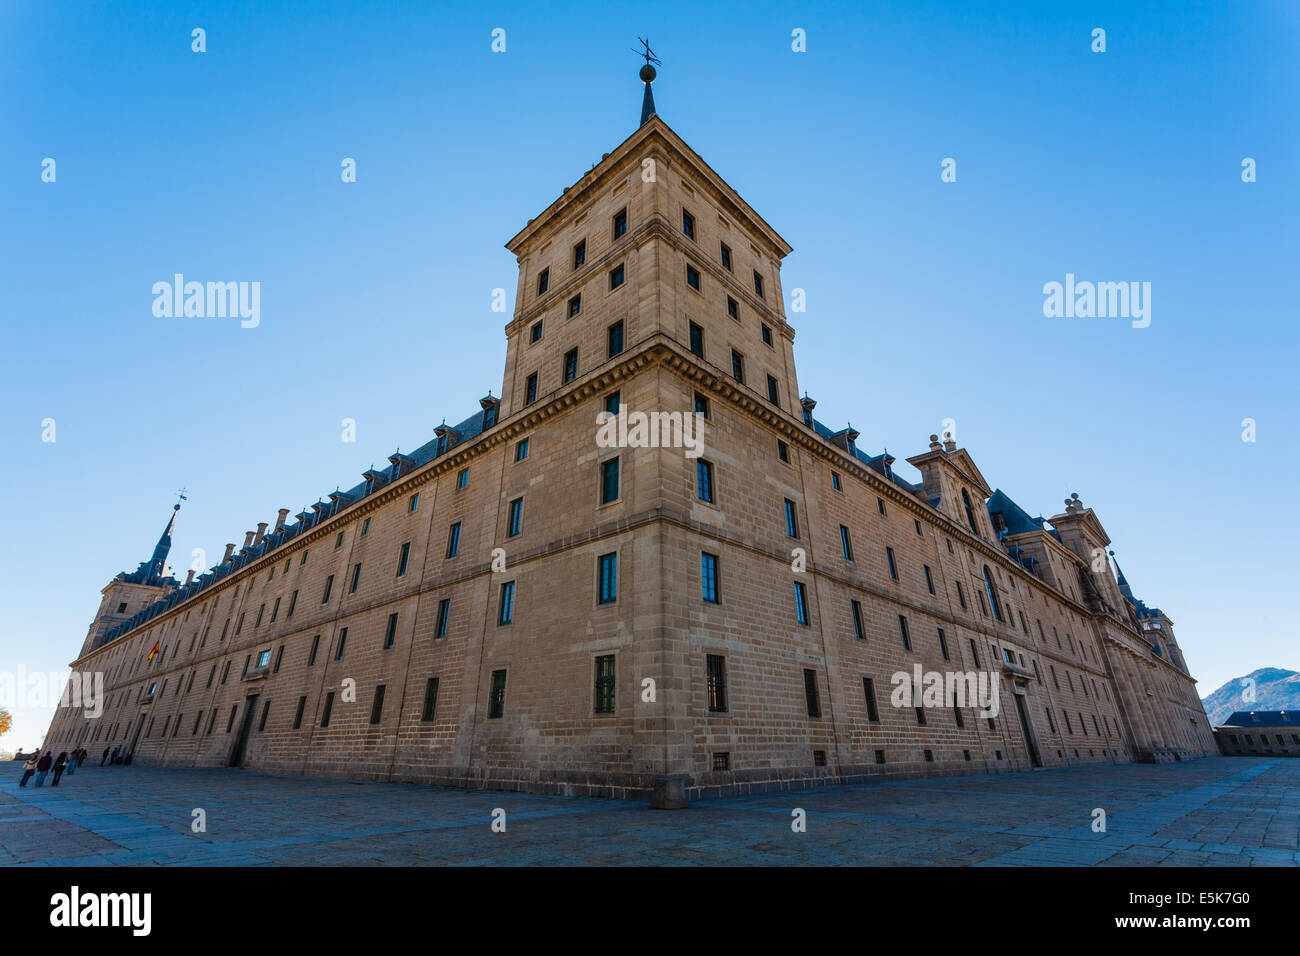 Full view of San Lorenzo de El Escorial Royal Site  taken from the big outdoors square showing its enormous structure Stock Photo